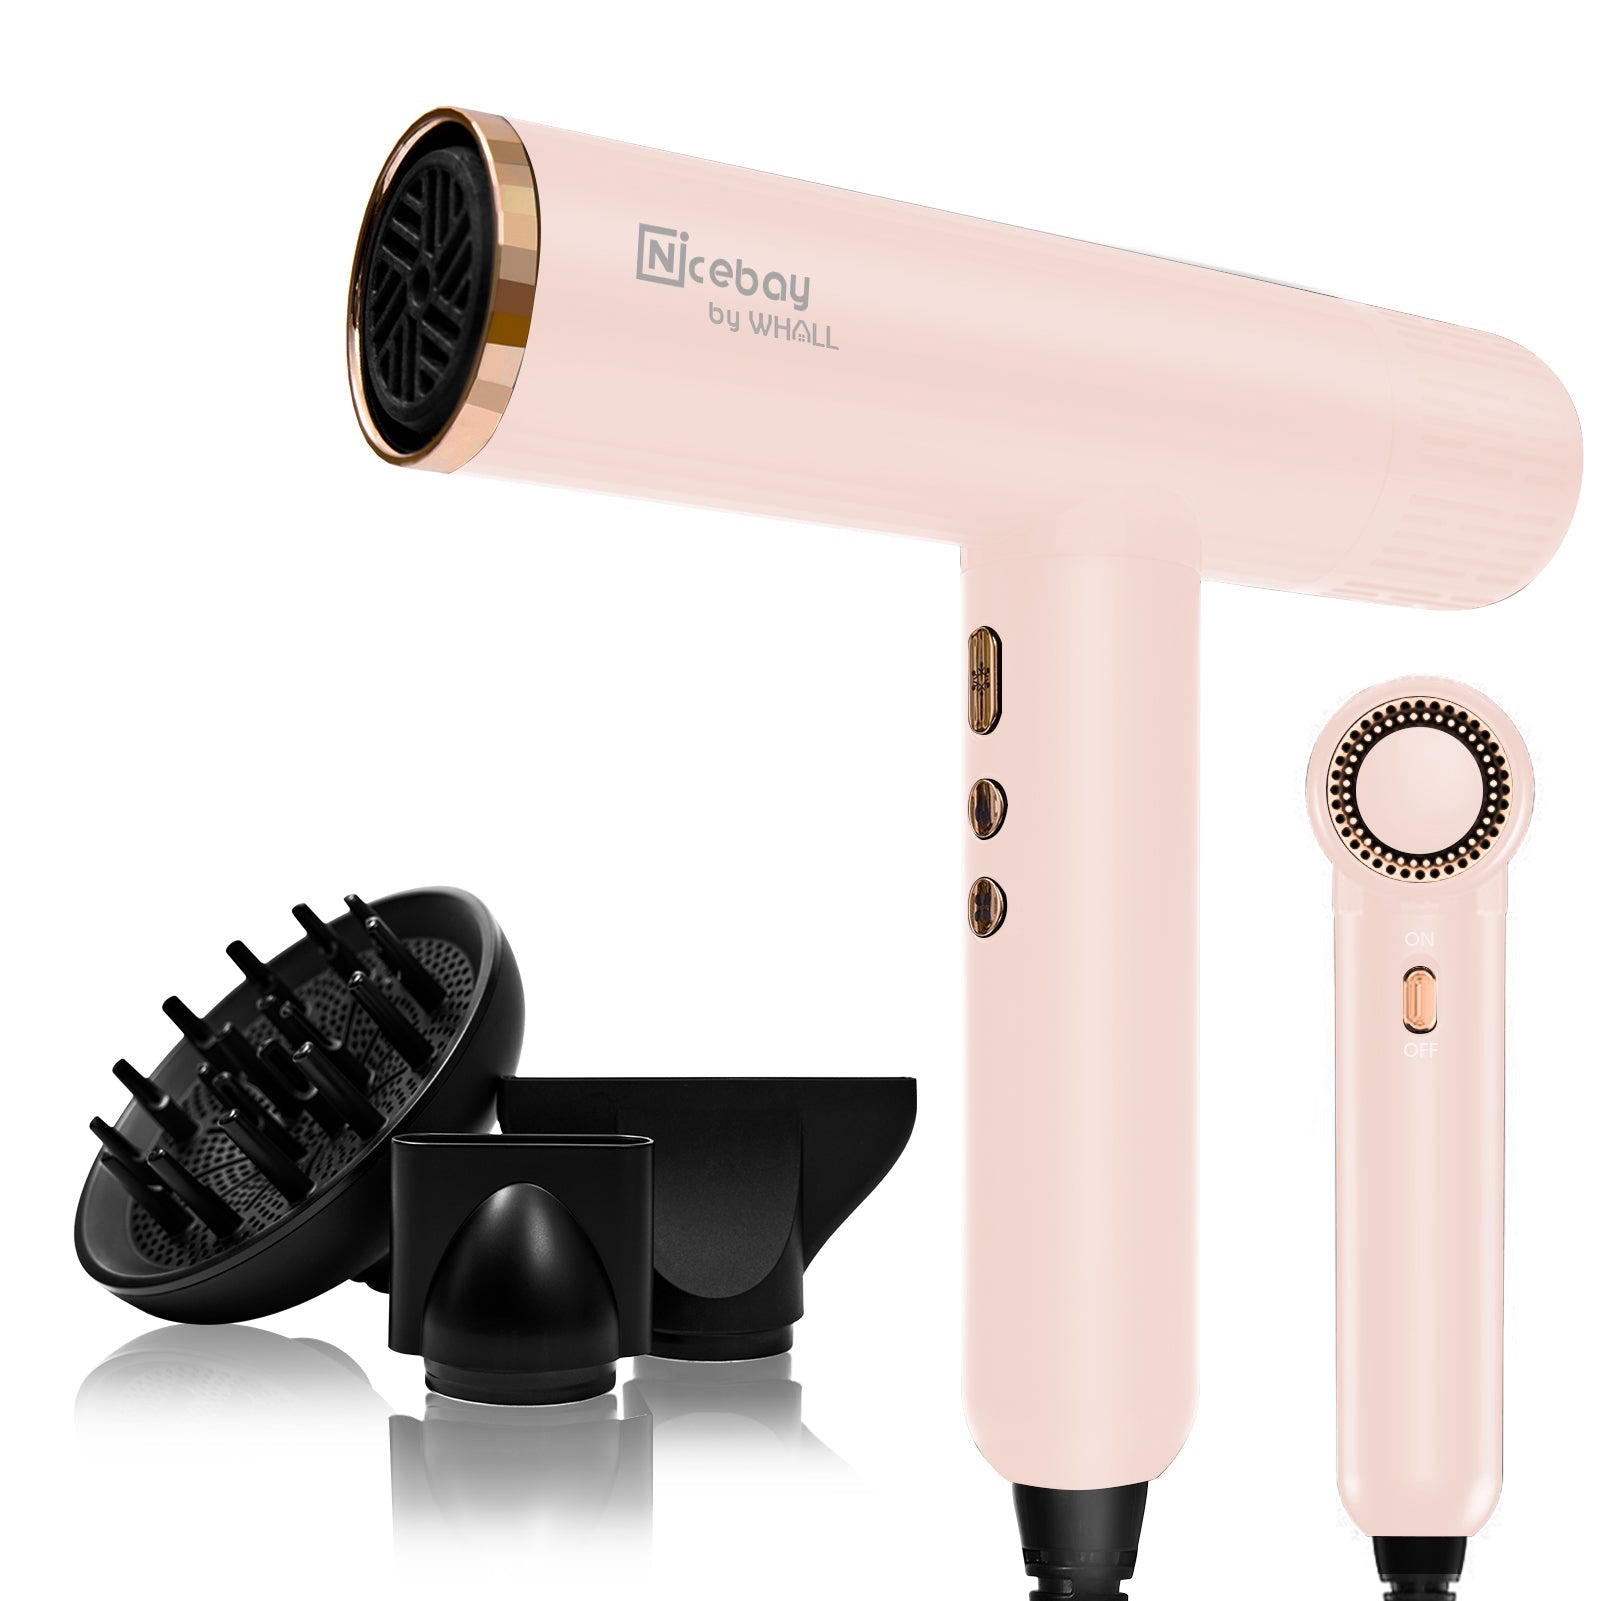 Nicebay 1600W High-Speed Brushless Motor Ionic Blow Dryer with Diffuser and 3 Magnetic Attachments for Fast Drying and Constant Temperature - Pink